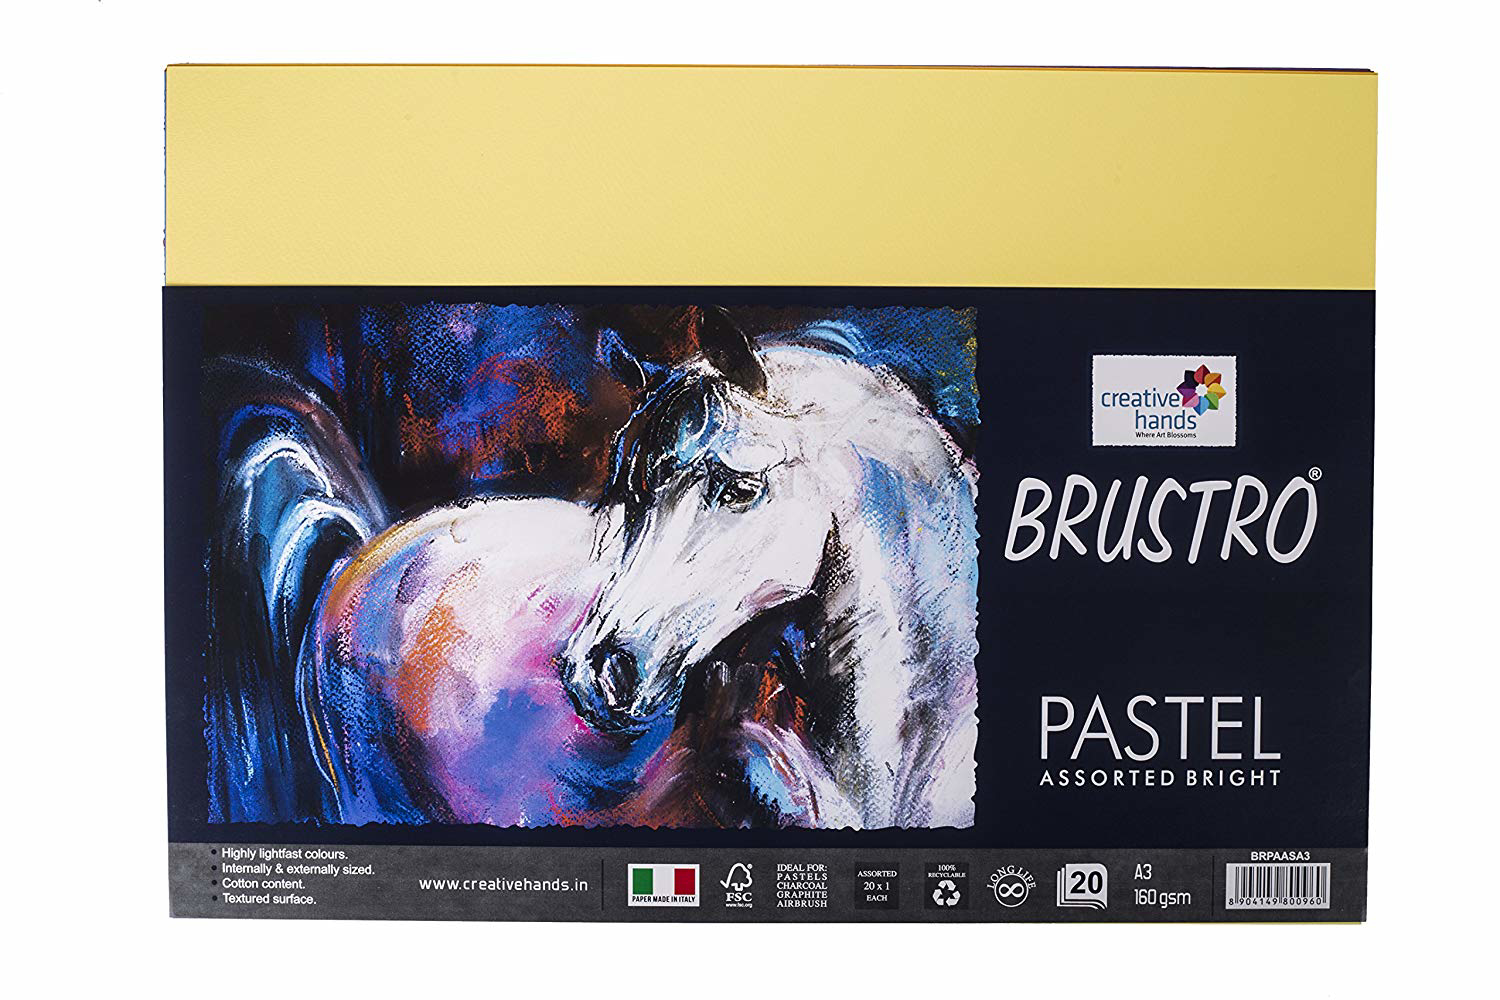 Brustro Pastel Assorted-Bright Paper 160gsm A3 (20 Sheets)